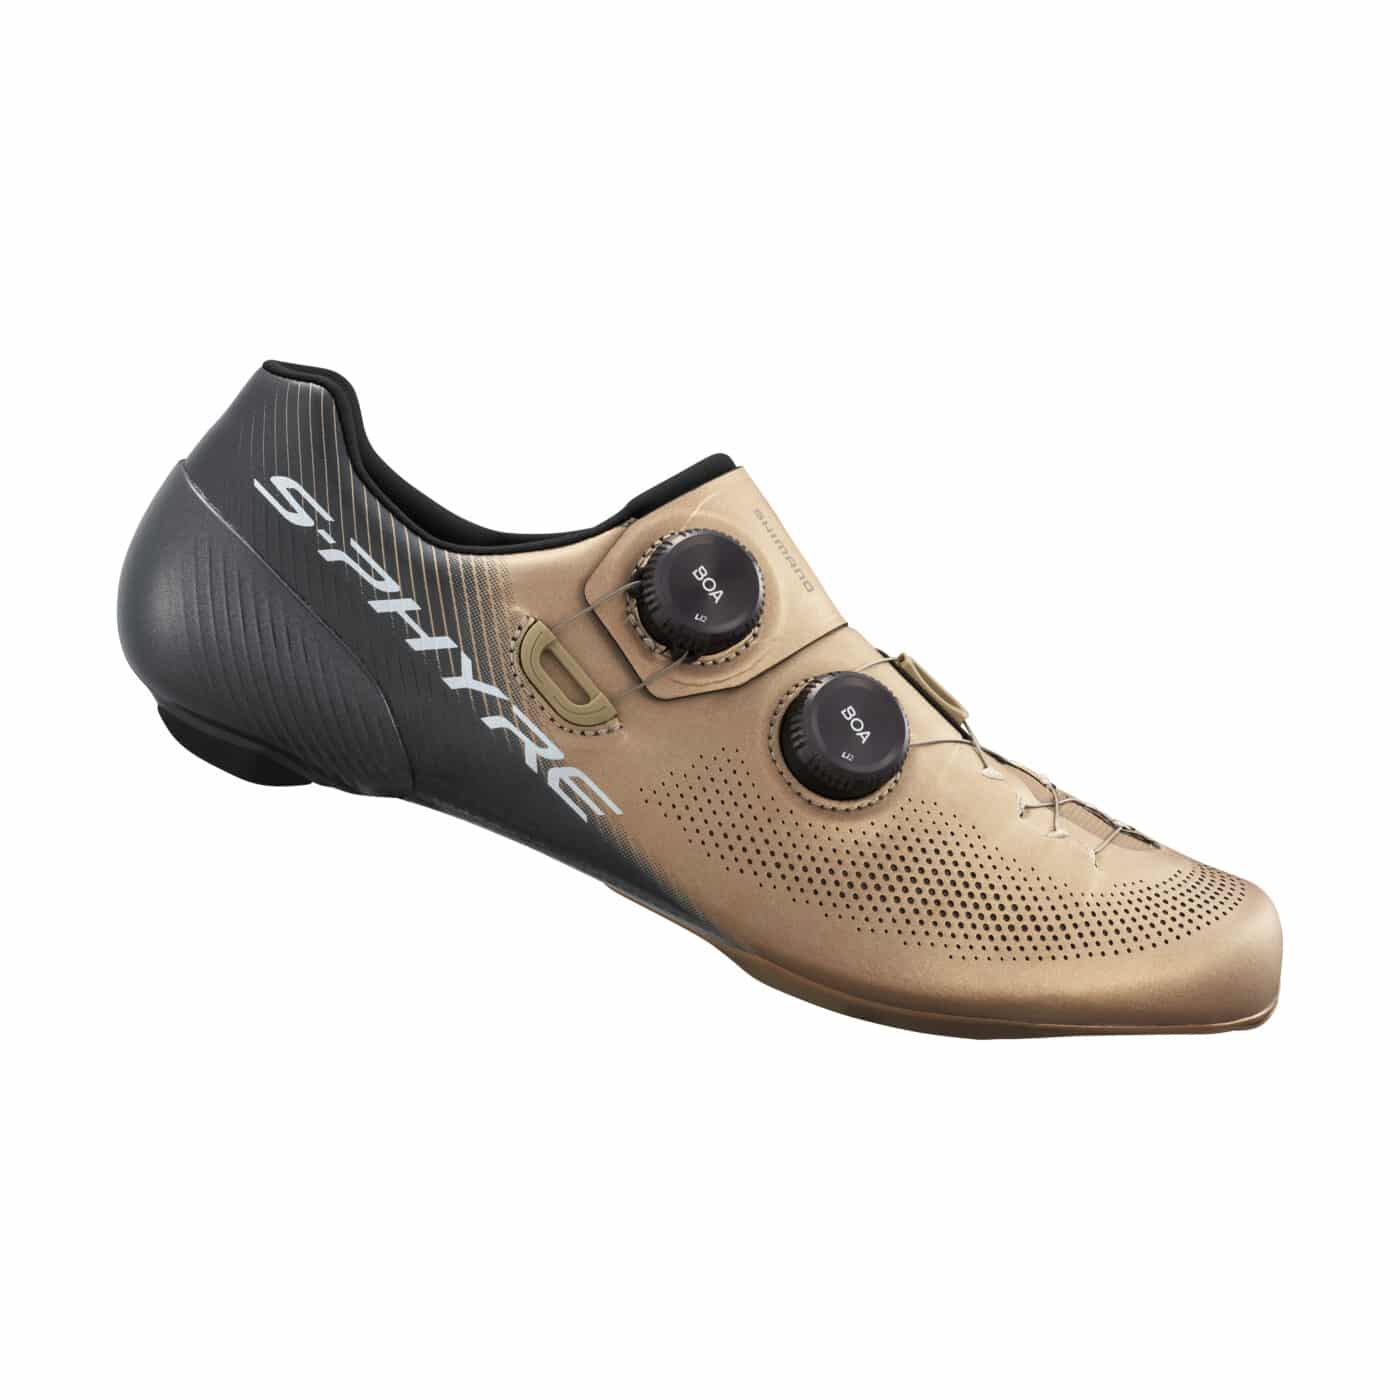 Chaussures Shimano S Phyre Champagne